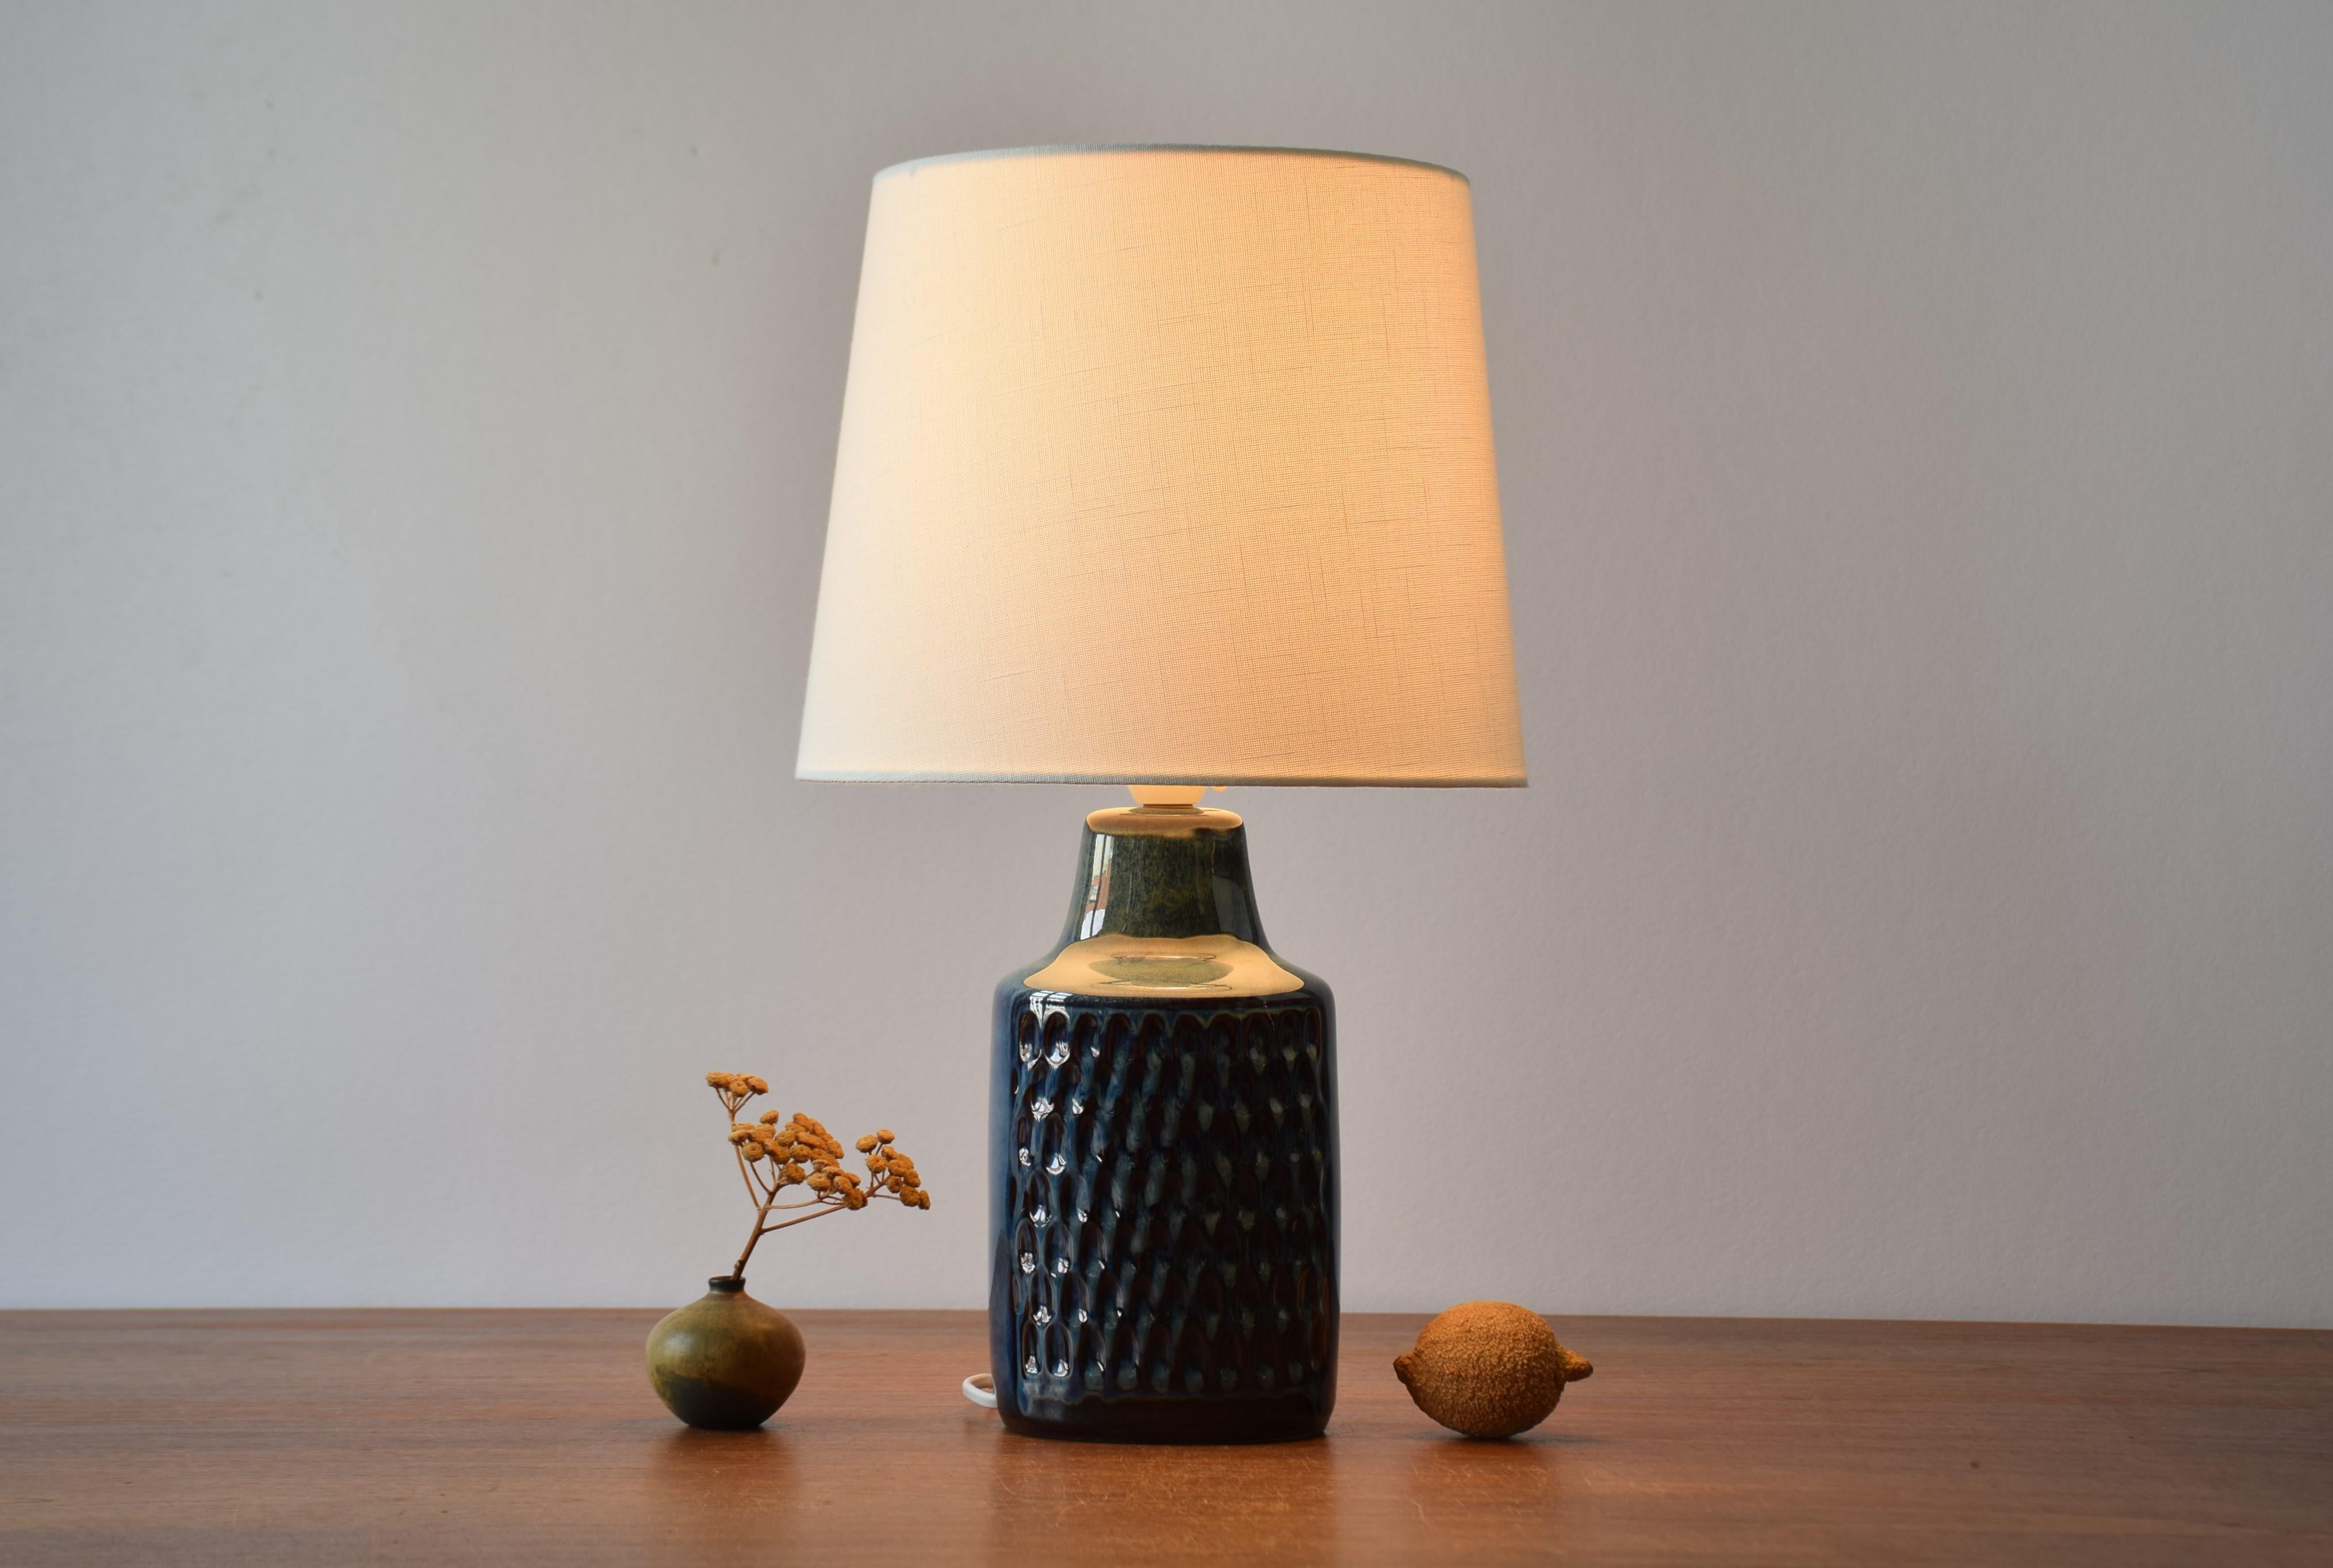 Mid-century Danish ceramic table lamp designed by Einar Johansen for Søholm Stentøj, Denmark. Made circa 1960s.

The lamp has a vivid glossy glaze in a dark blue with hints of brown and beige. 

Included is a new lamp shade designed and made in